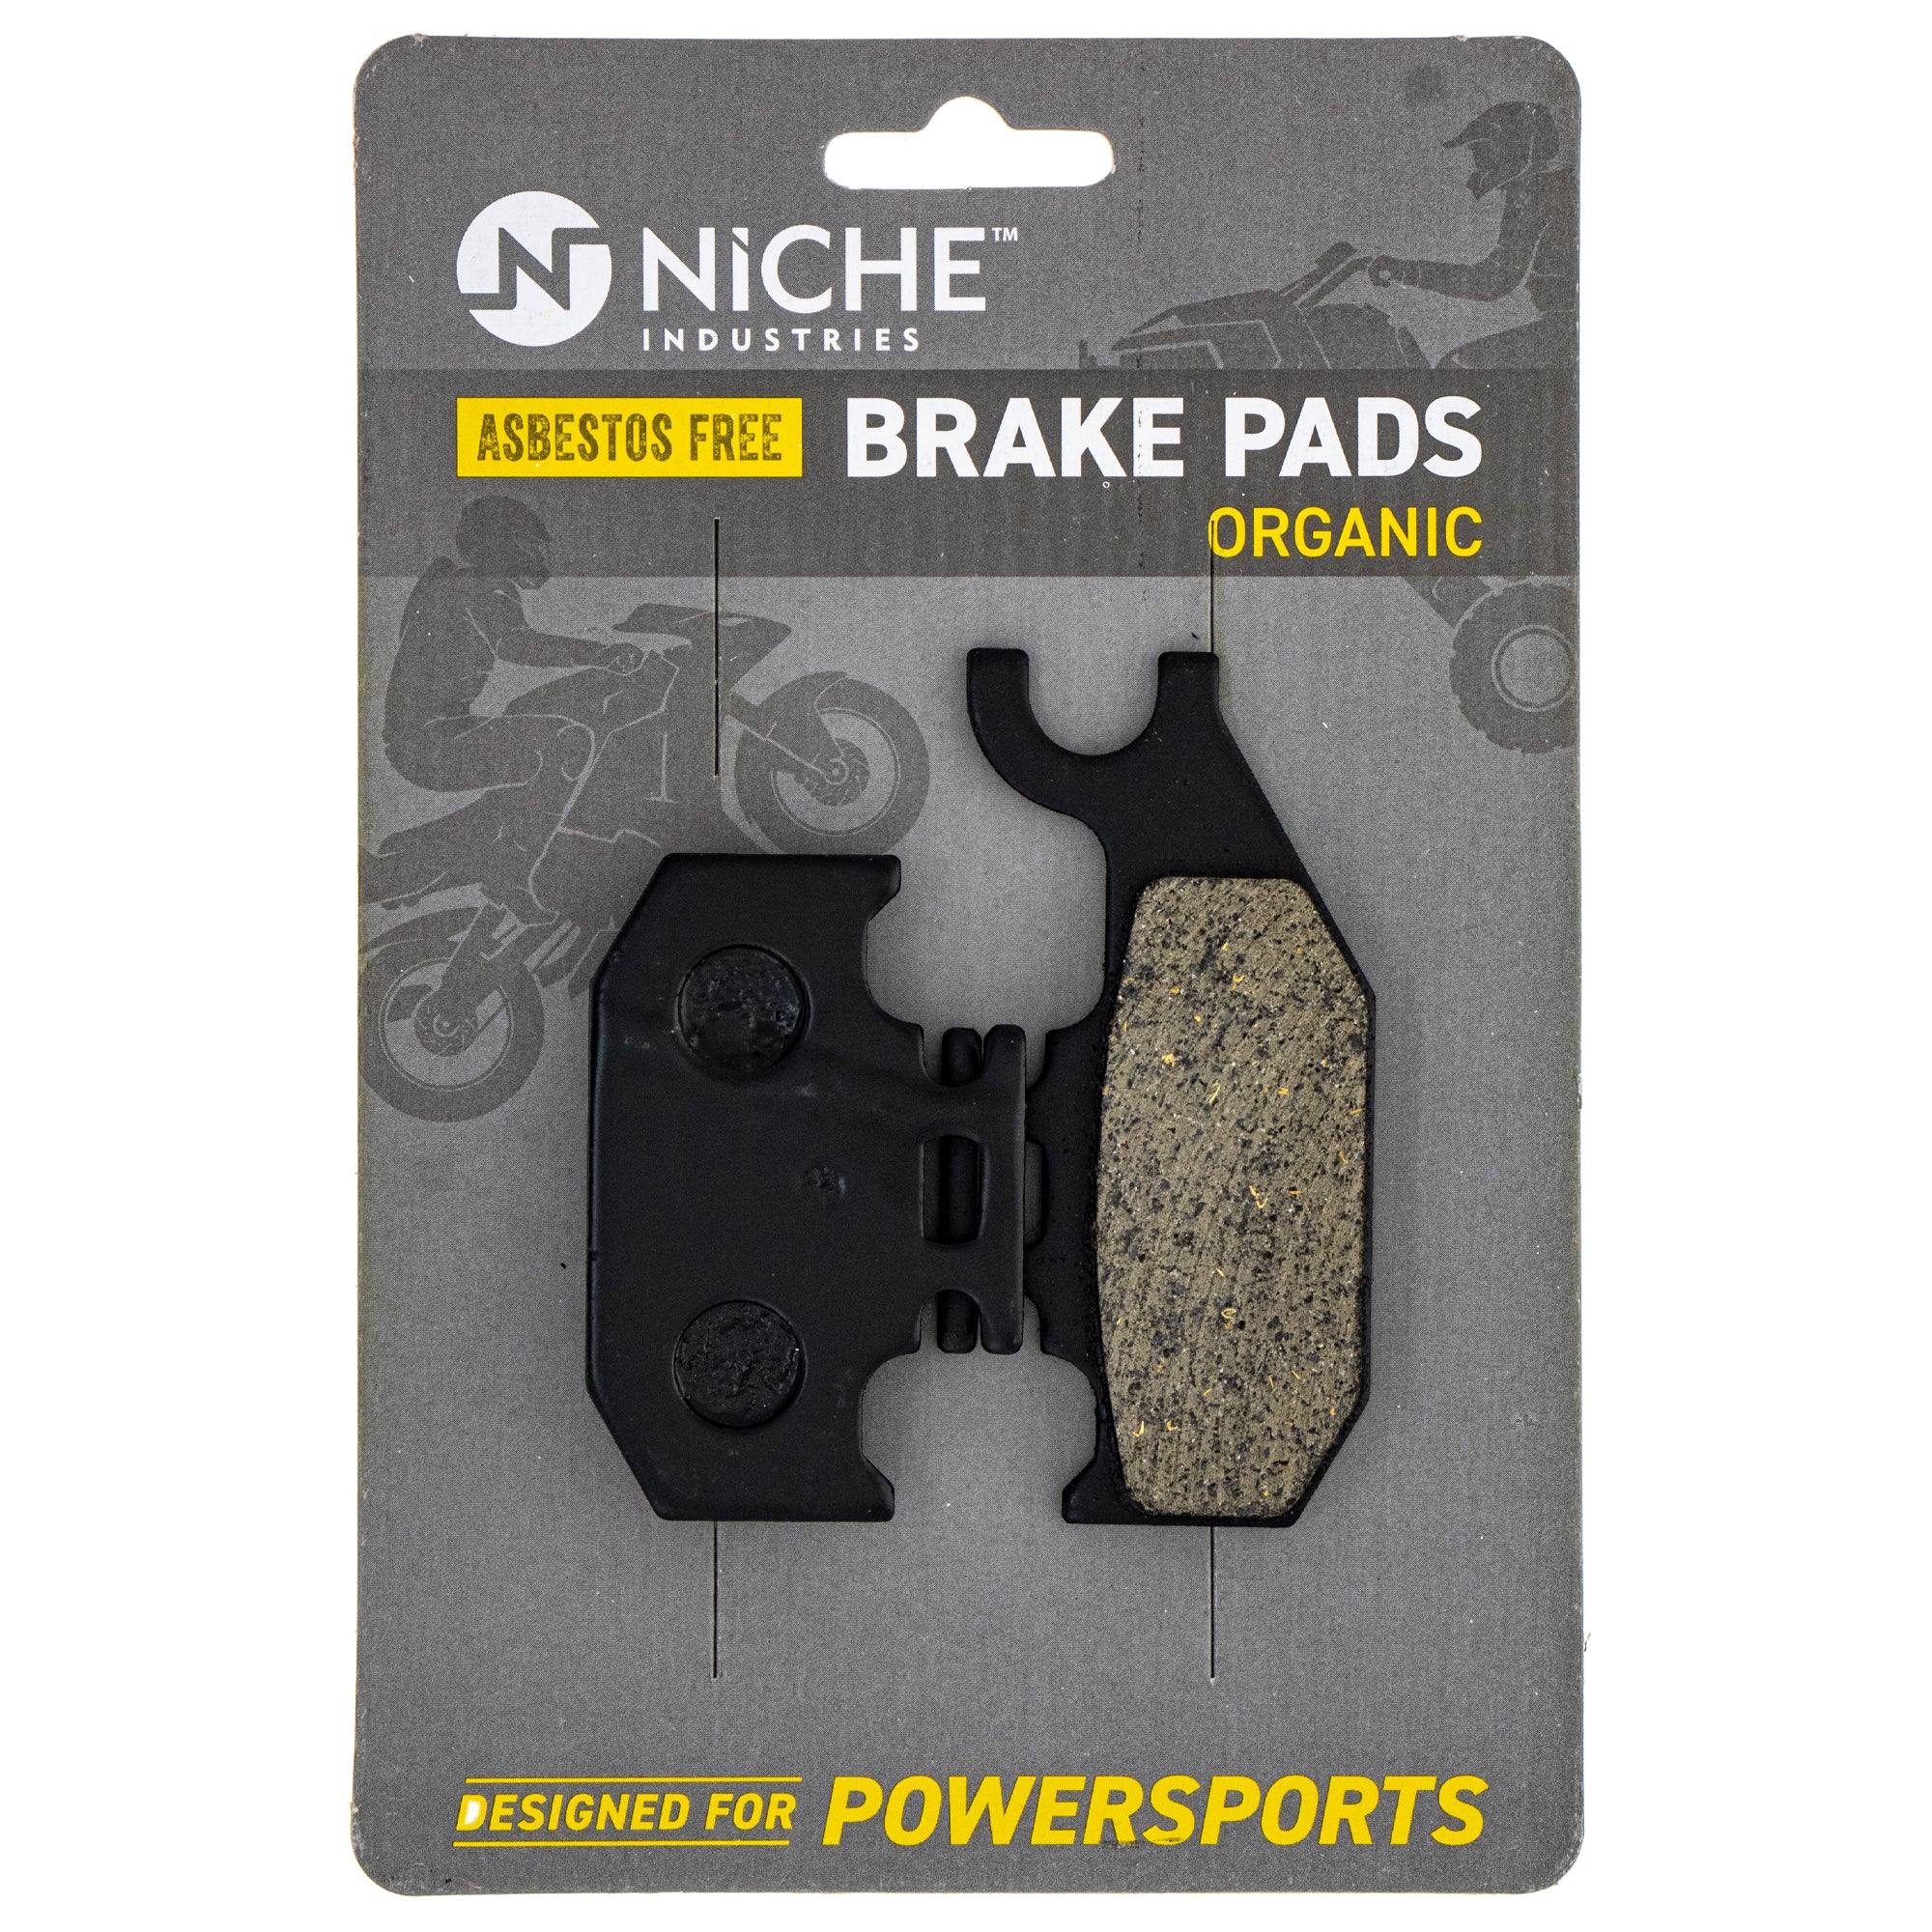 NICHE MK1001592 Brake Pad Kit Front/Rear for BRP Can-Am Ski-Doo